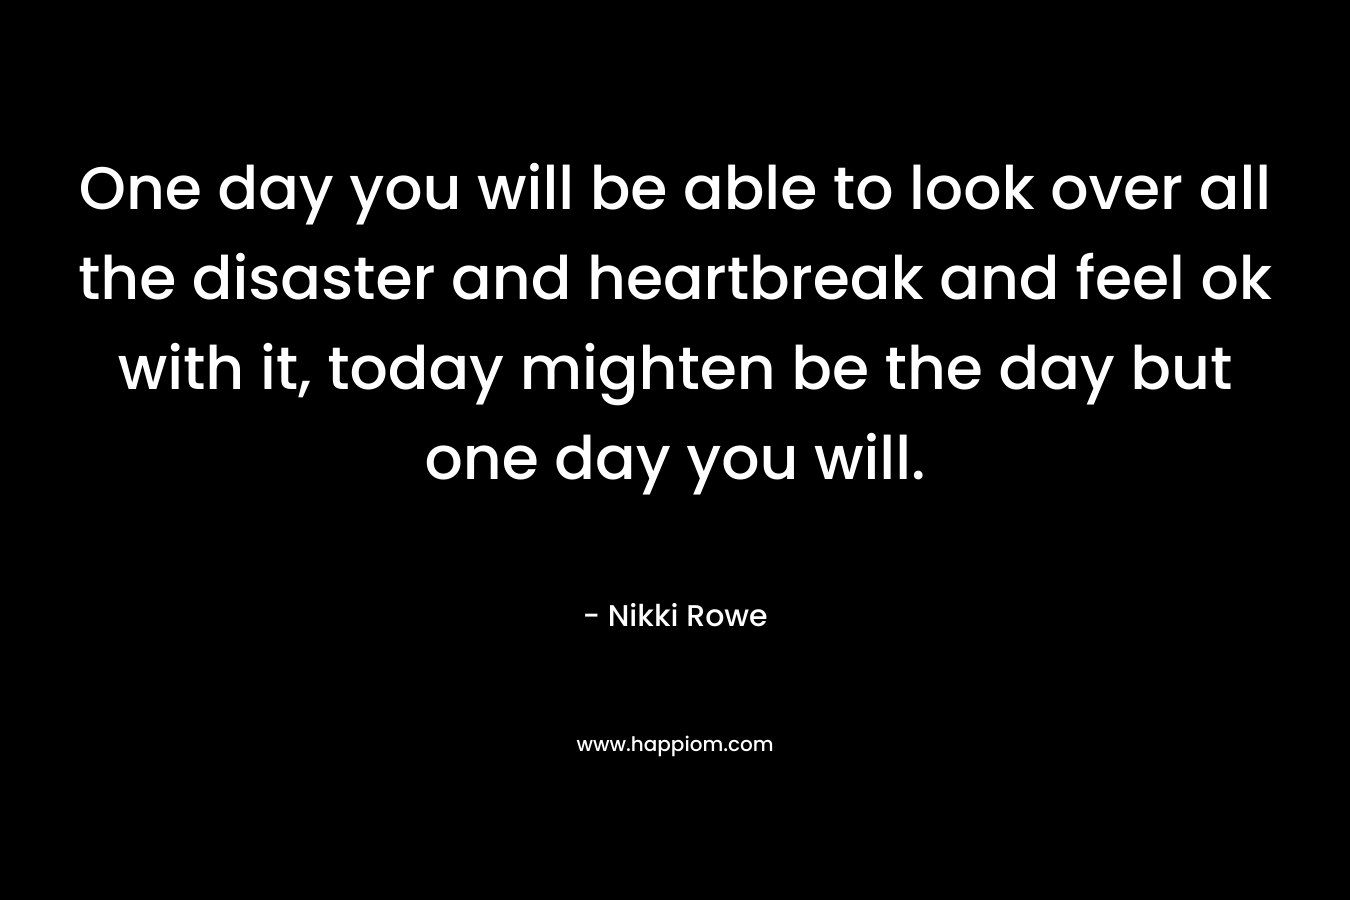 One day you will be able to look over all the disaster and heartbreak and feel ok with it, today mighten be the day but one day you will.